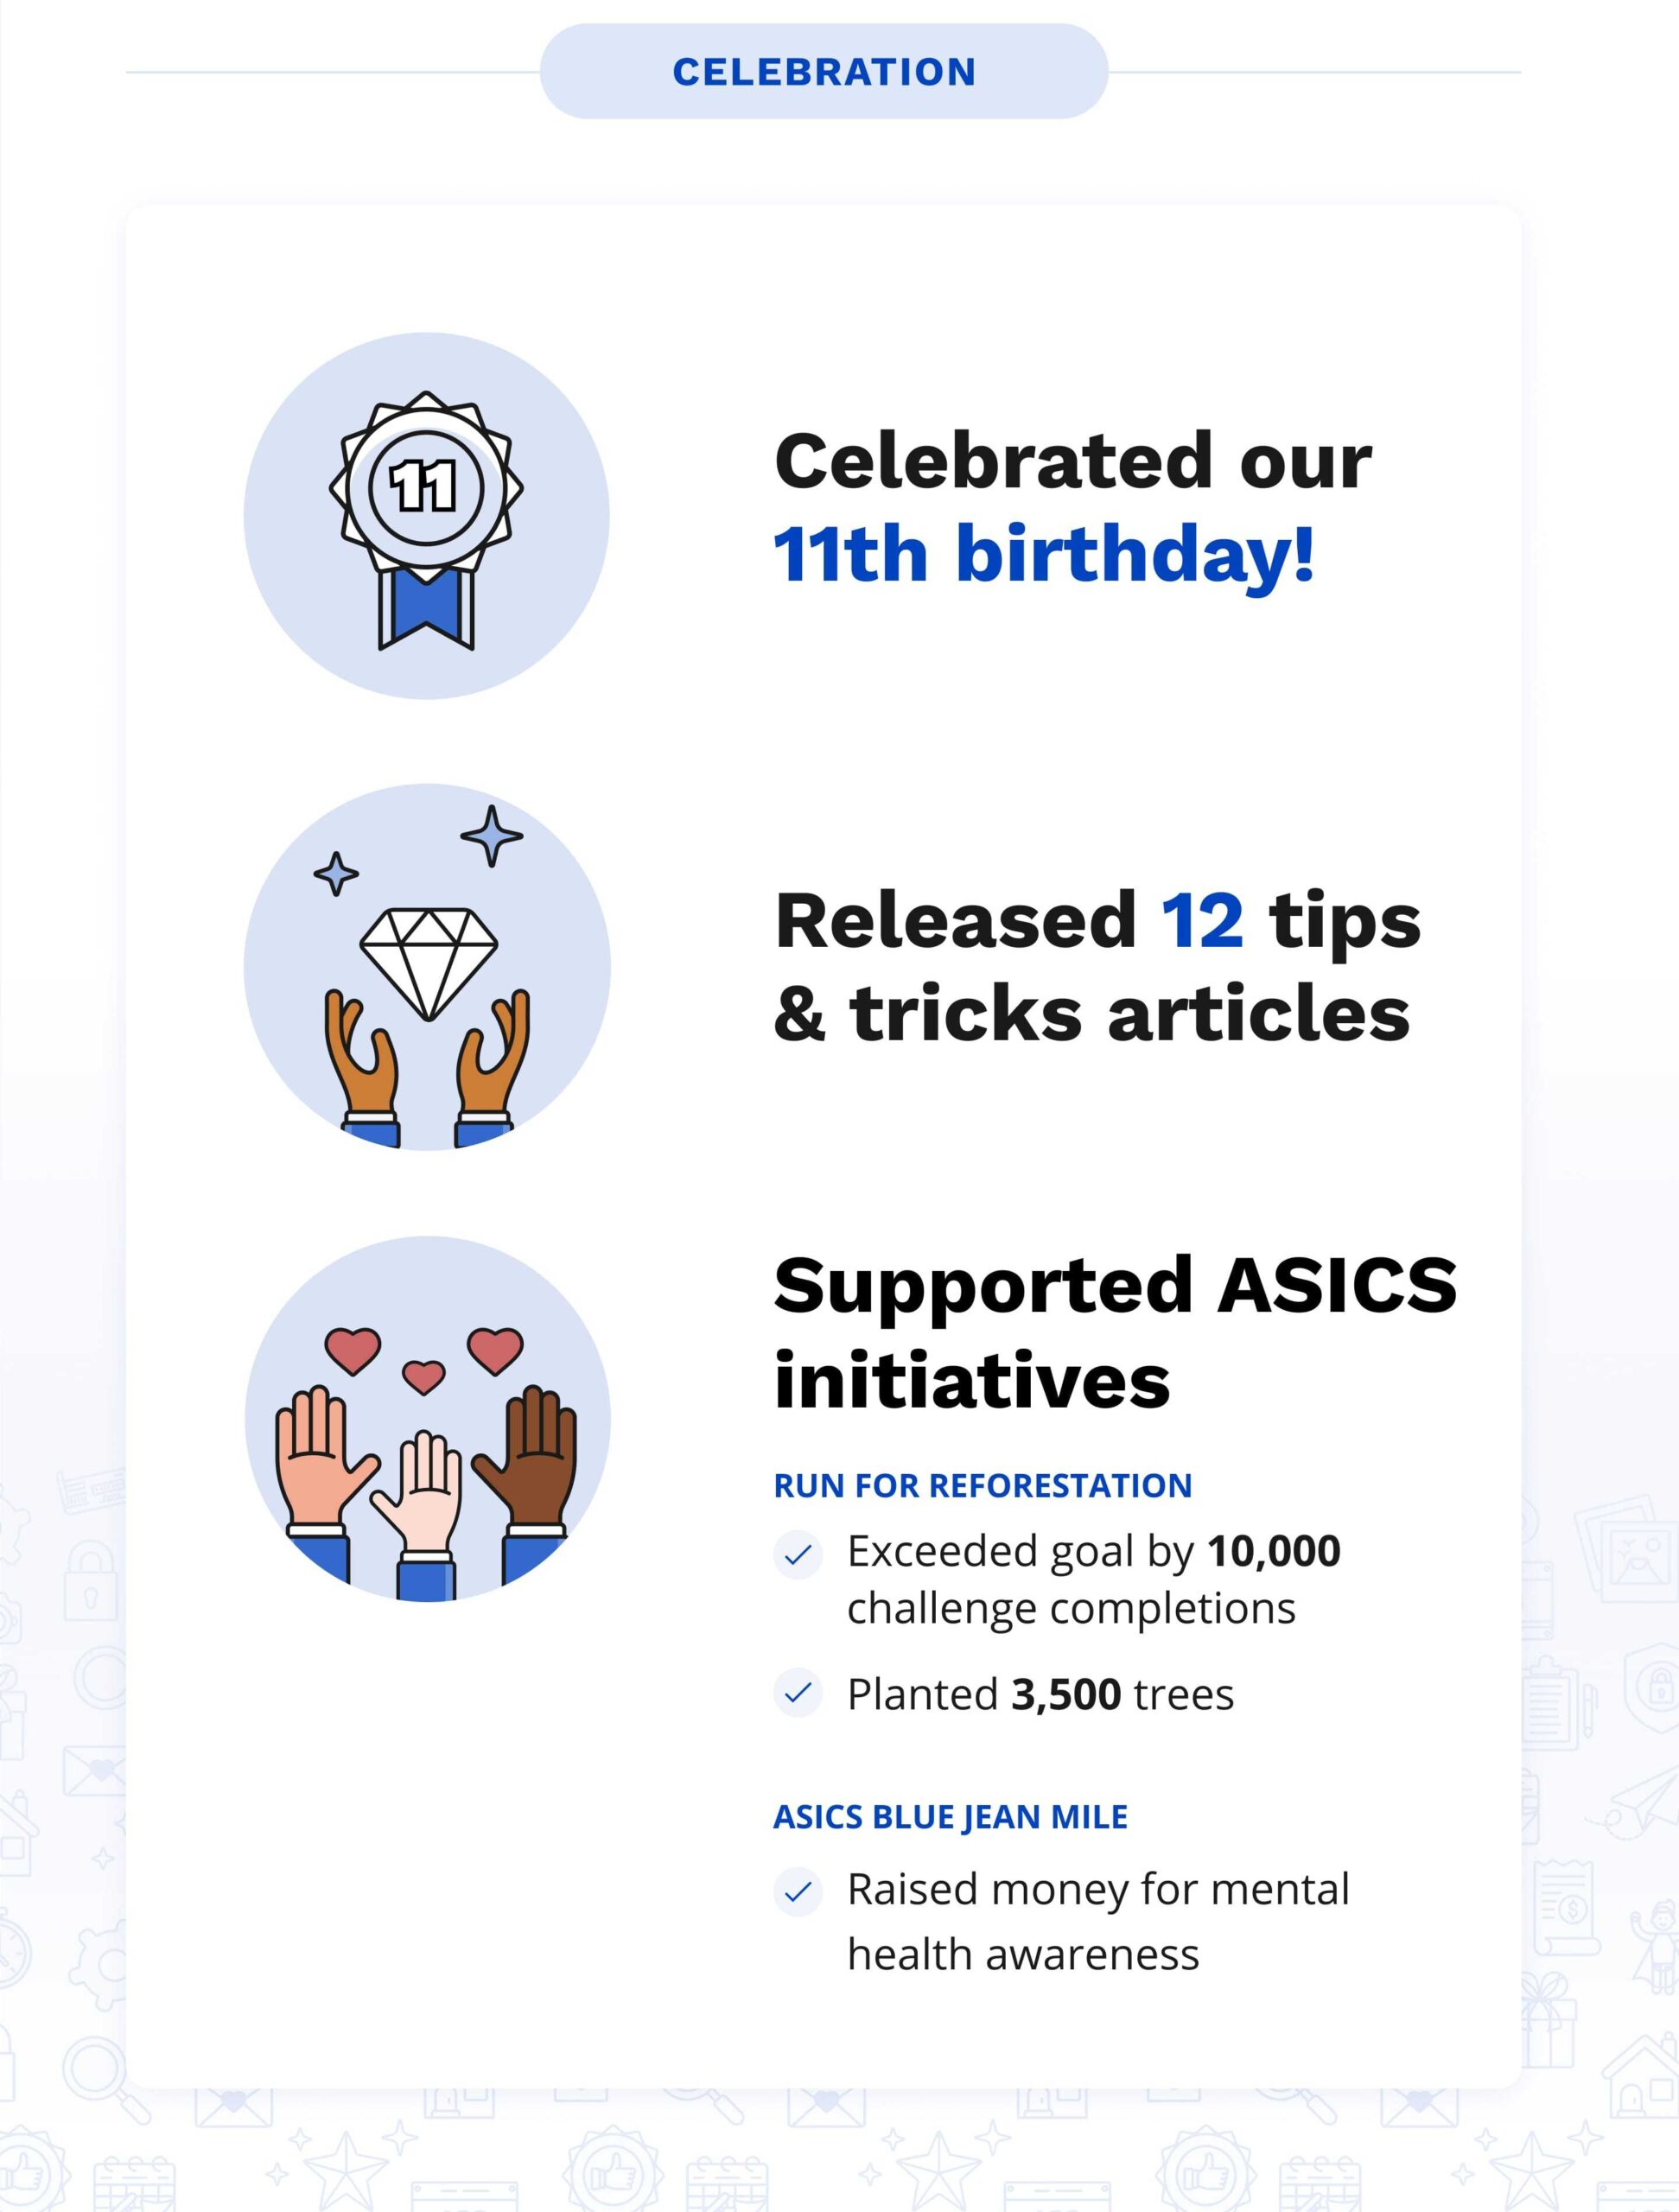 Celebration - Celebrated in our 11th birthday! Released 12 tips & tricks articles and Supported ASICS initiatives, Run for Reforestation: Exceeded goal ny 10,000 challenge completions, planted 3,500 trees, ASICS blue jean mile - Raised money for mental health awareness